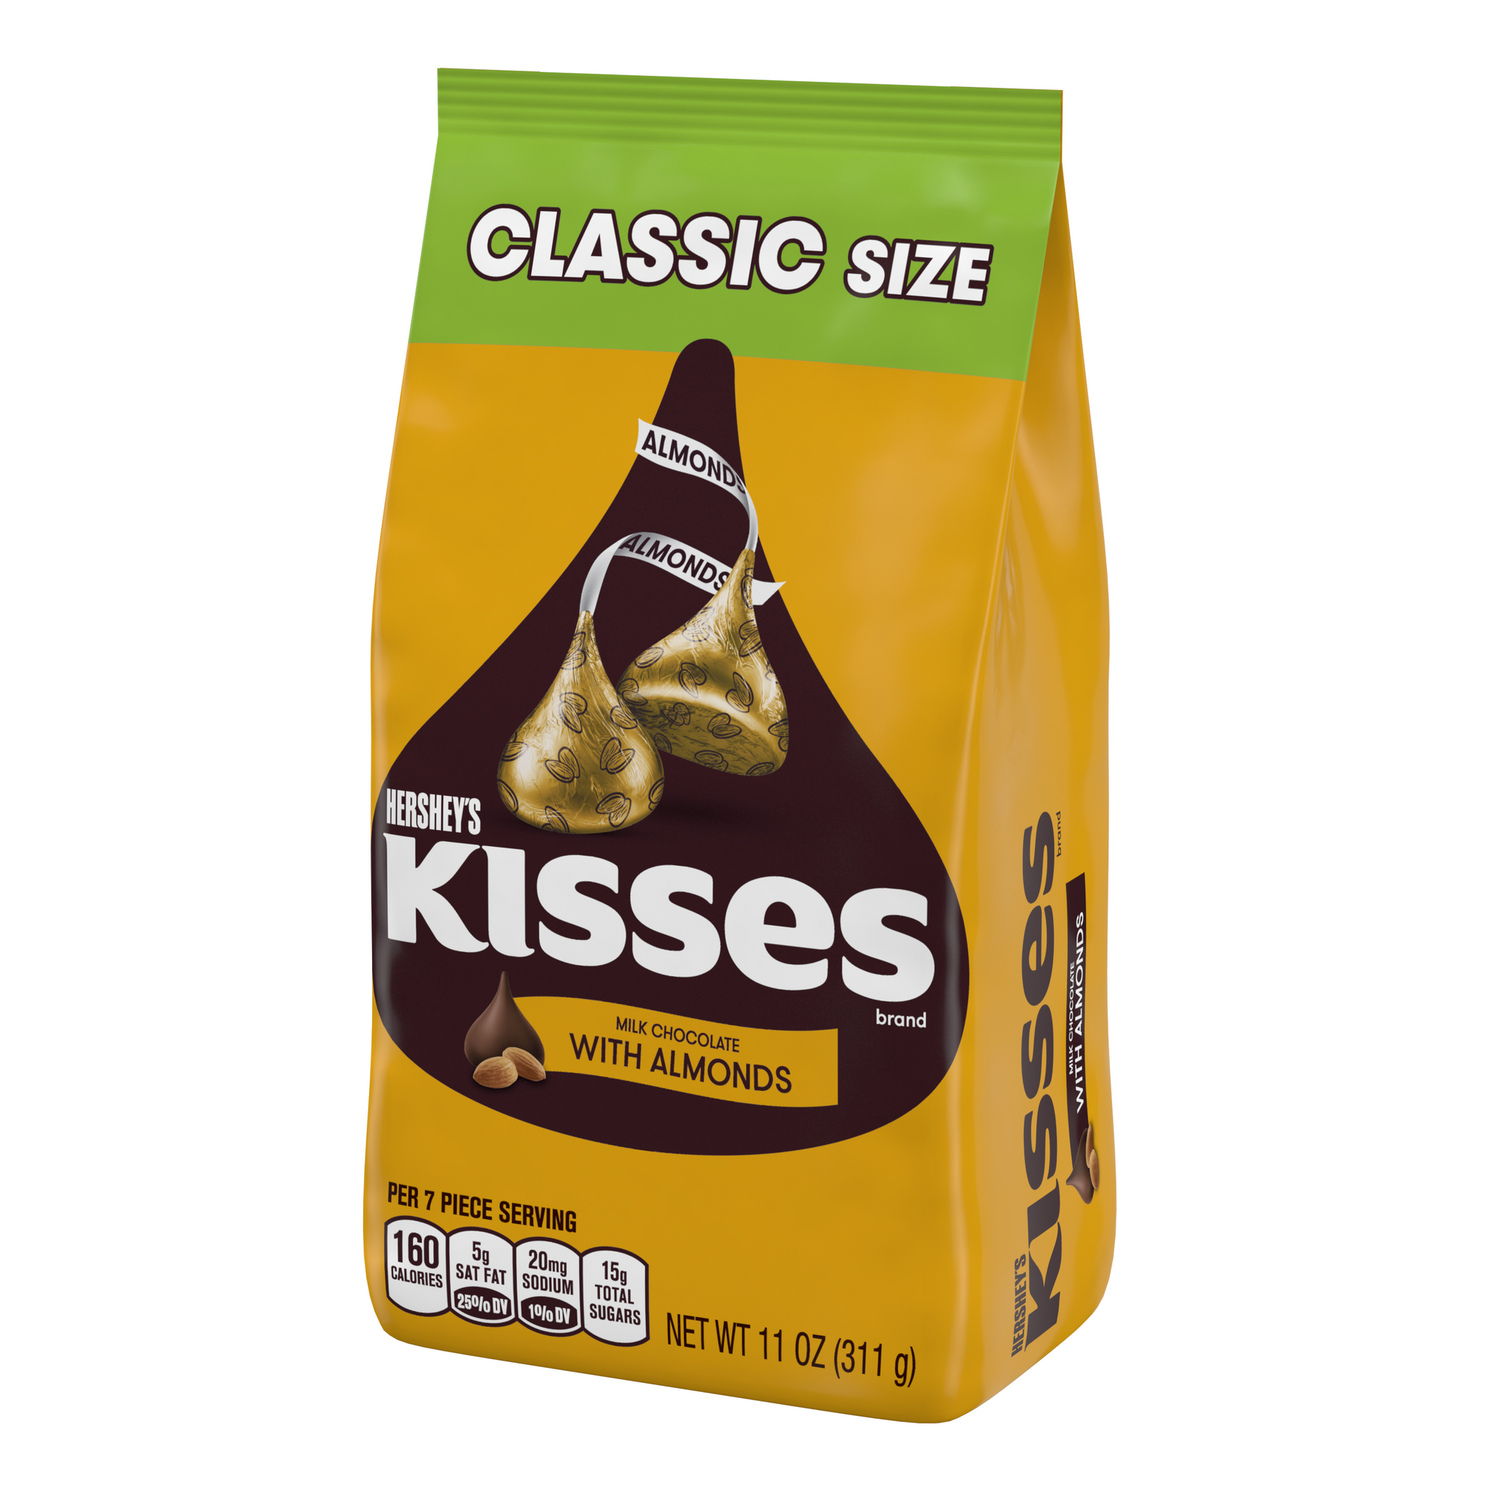 How many hershey kisses are in an 11 oz bag Amazon Com Hershey S Kisses Milk Chocolate Filled With Caramel 11 Ounce Bags Pack Of 4 Chocolate Assortments And Samplers Grocery Gourmet Food